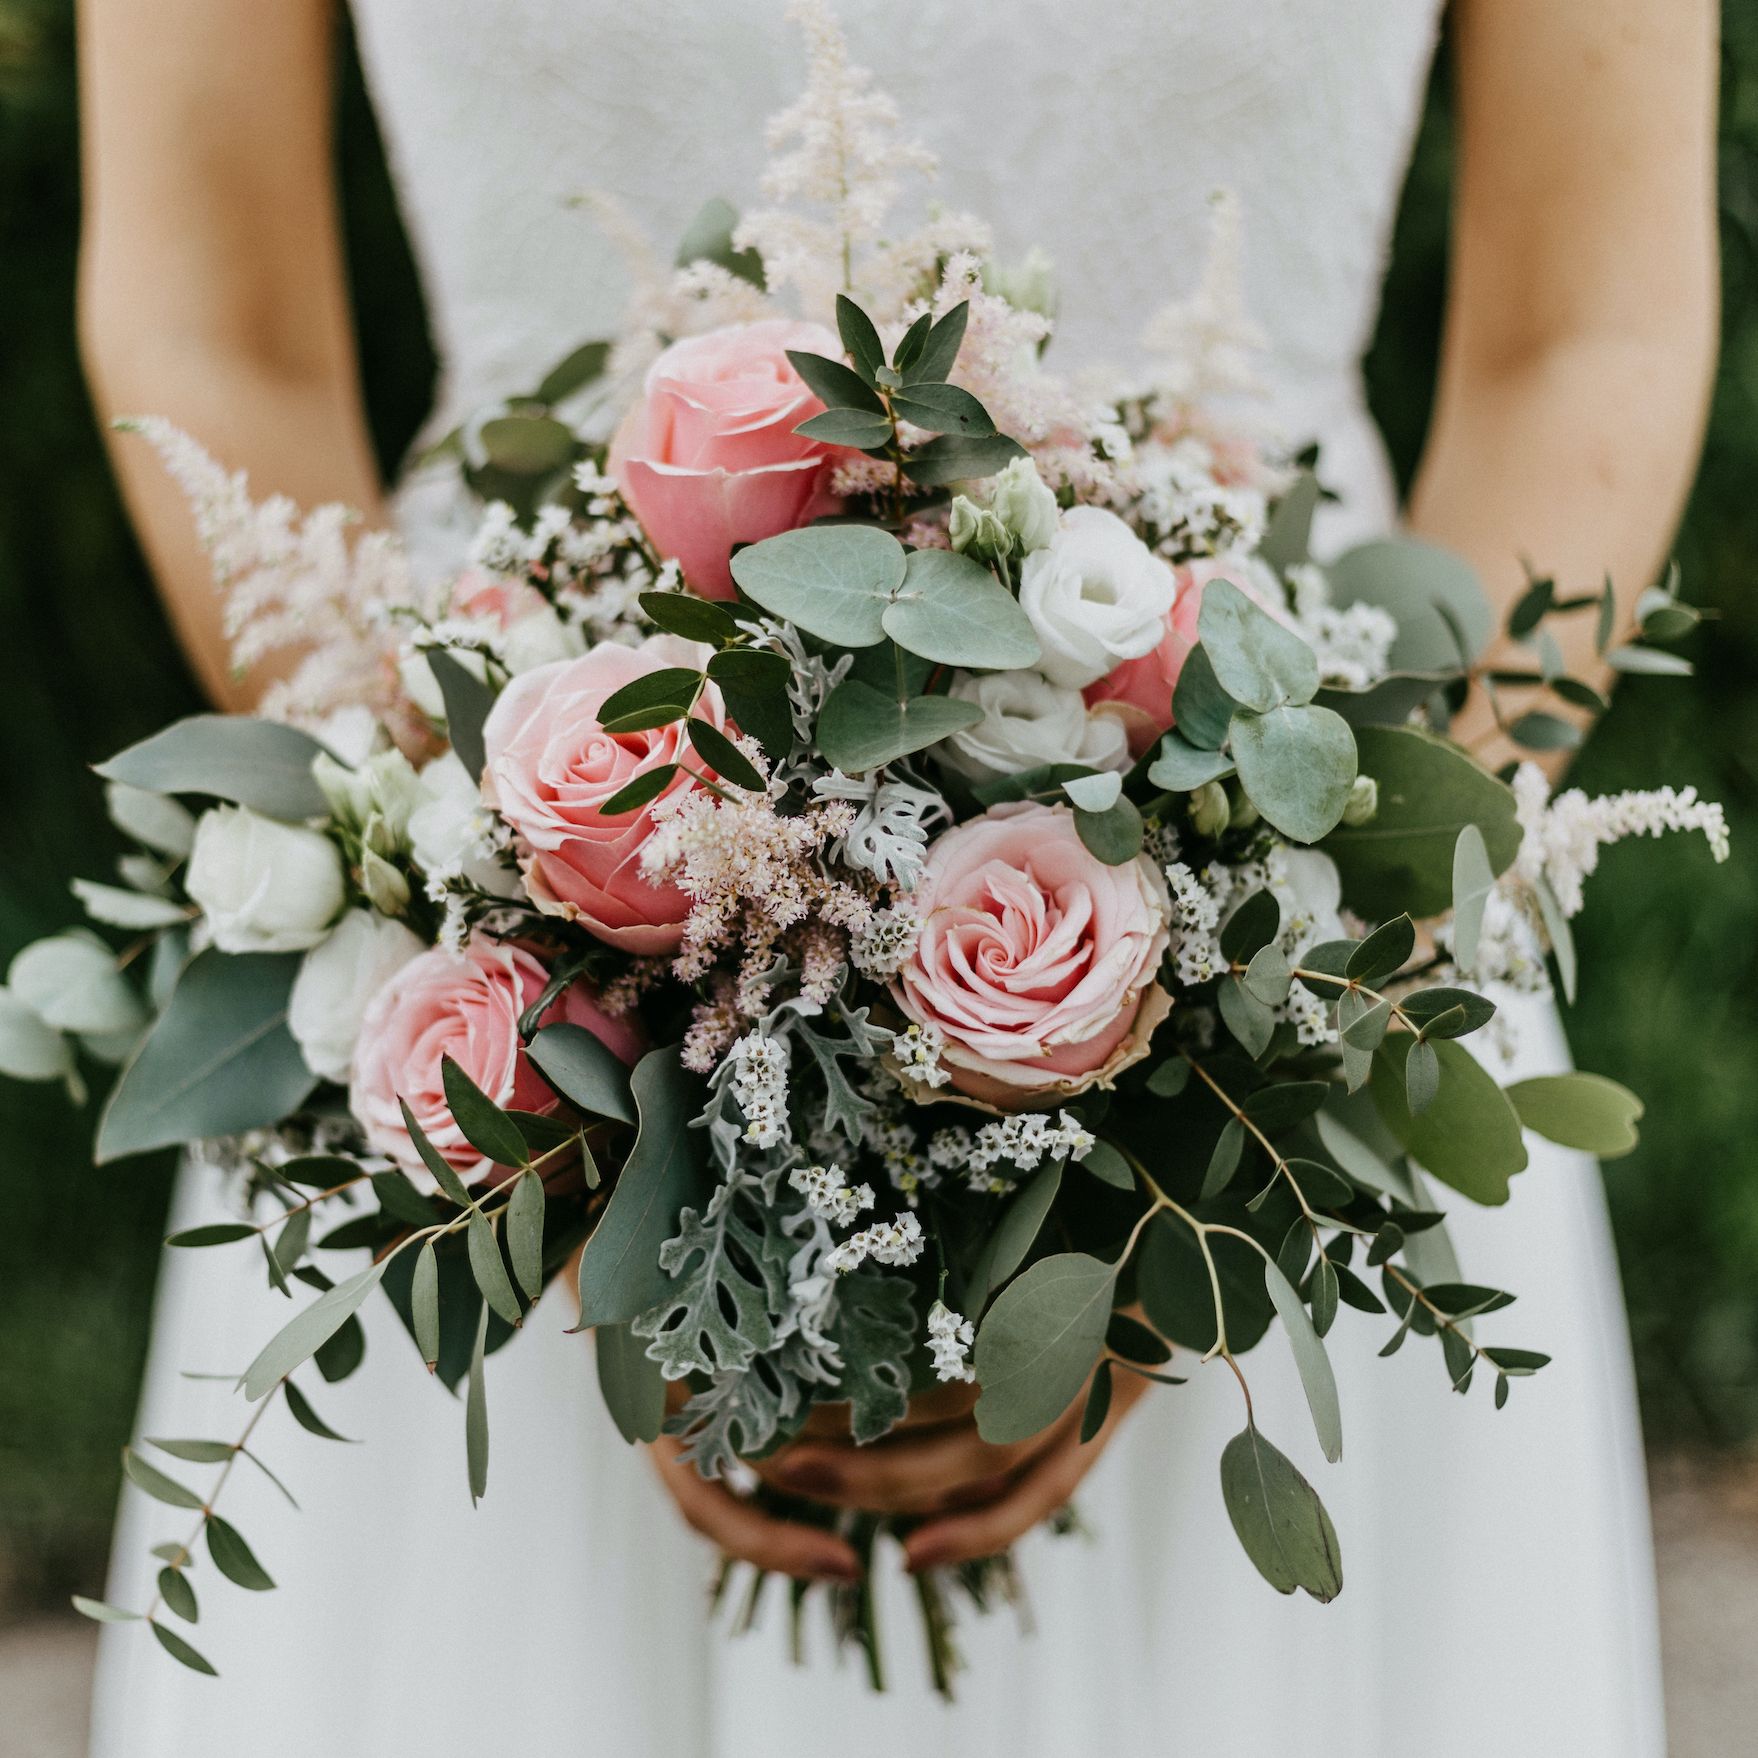 how to grow your own wedding flowers, according to sarah raven